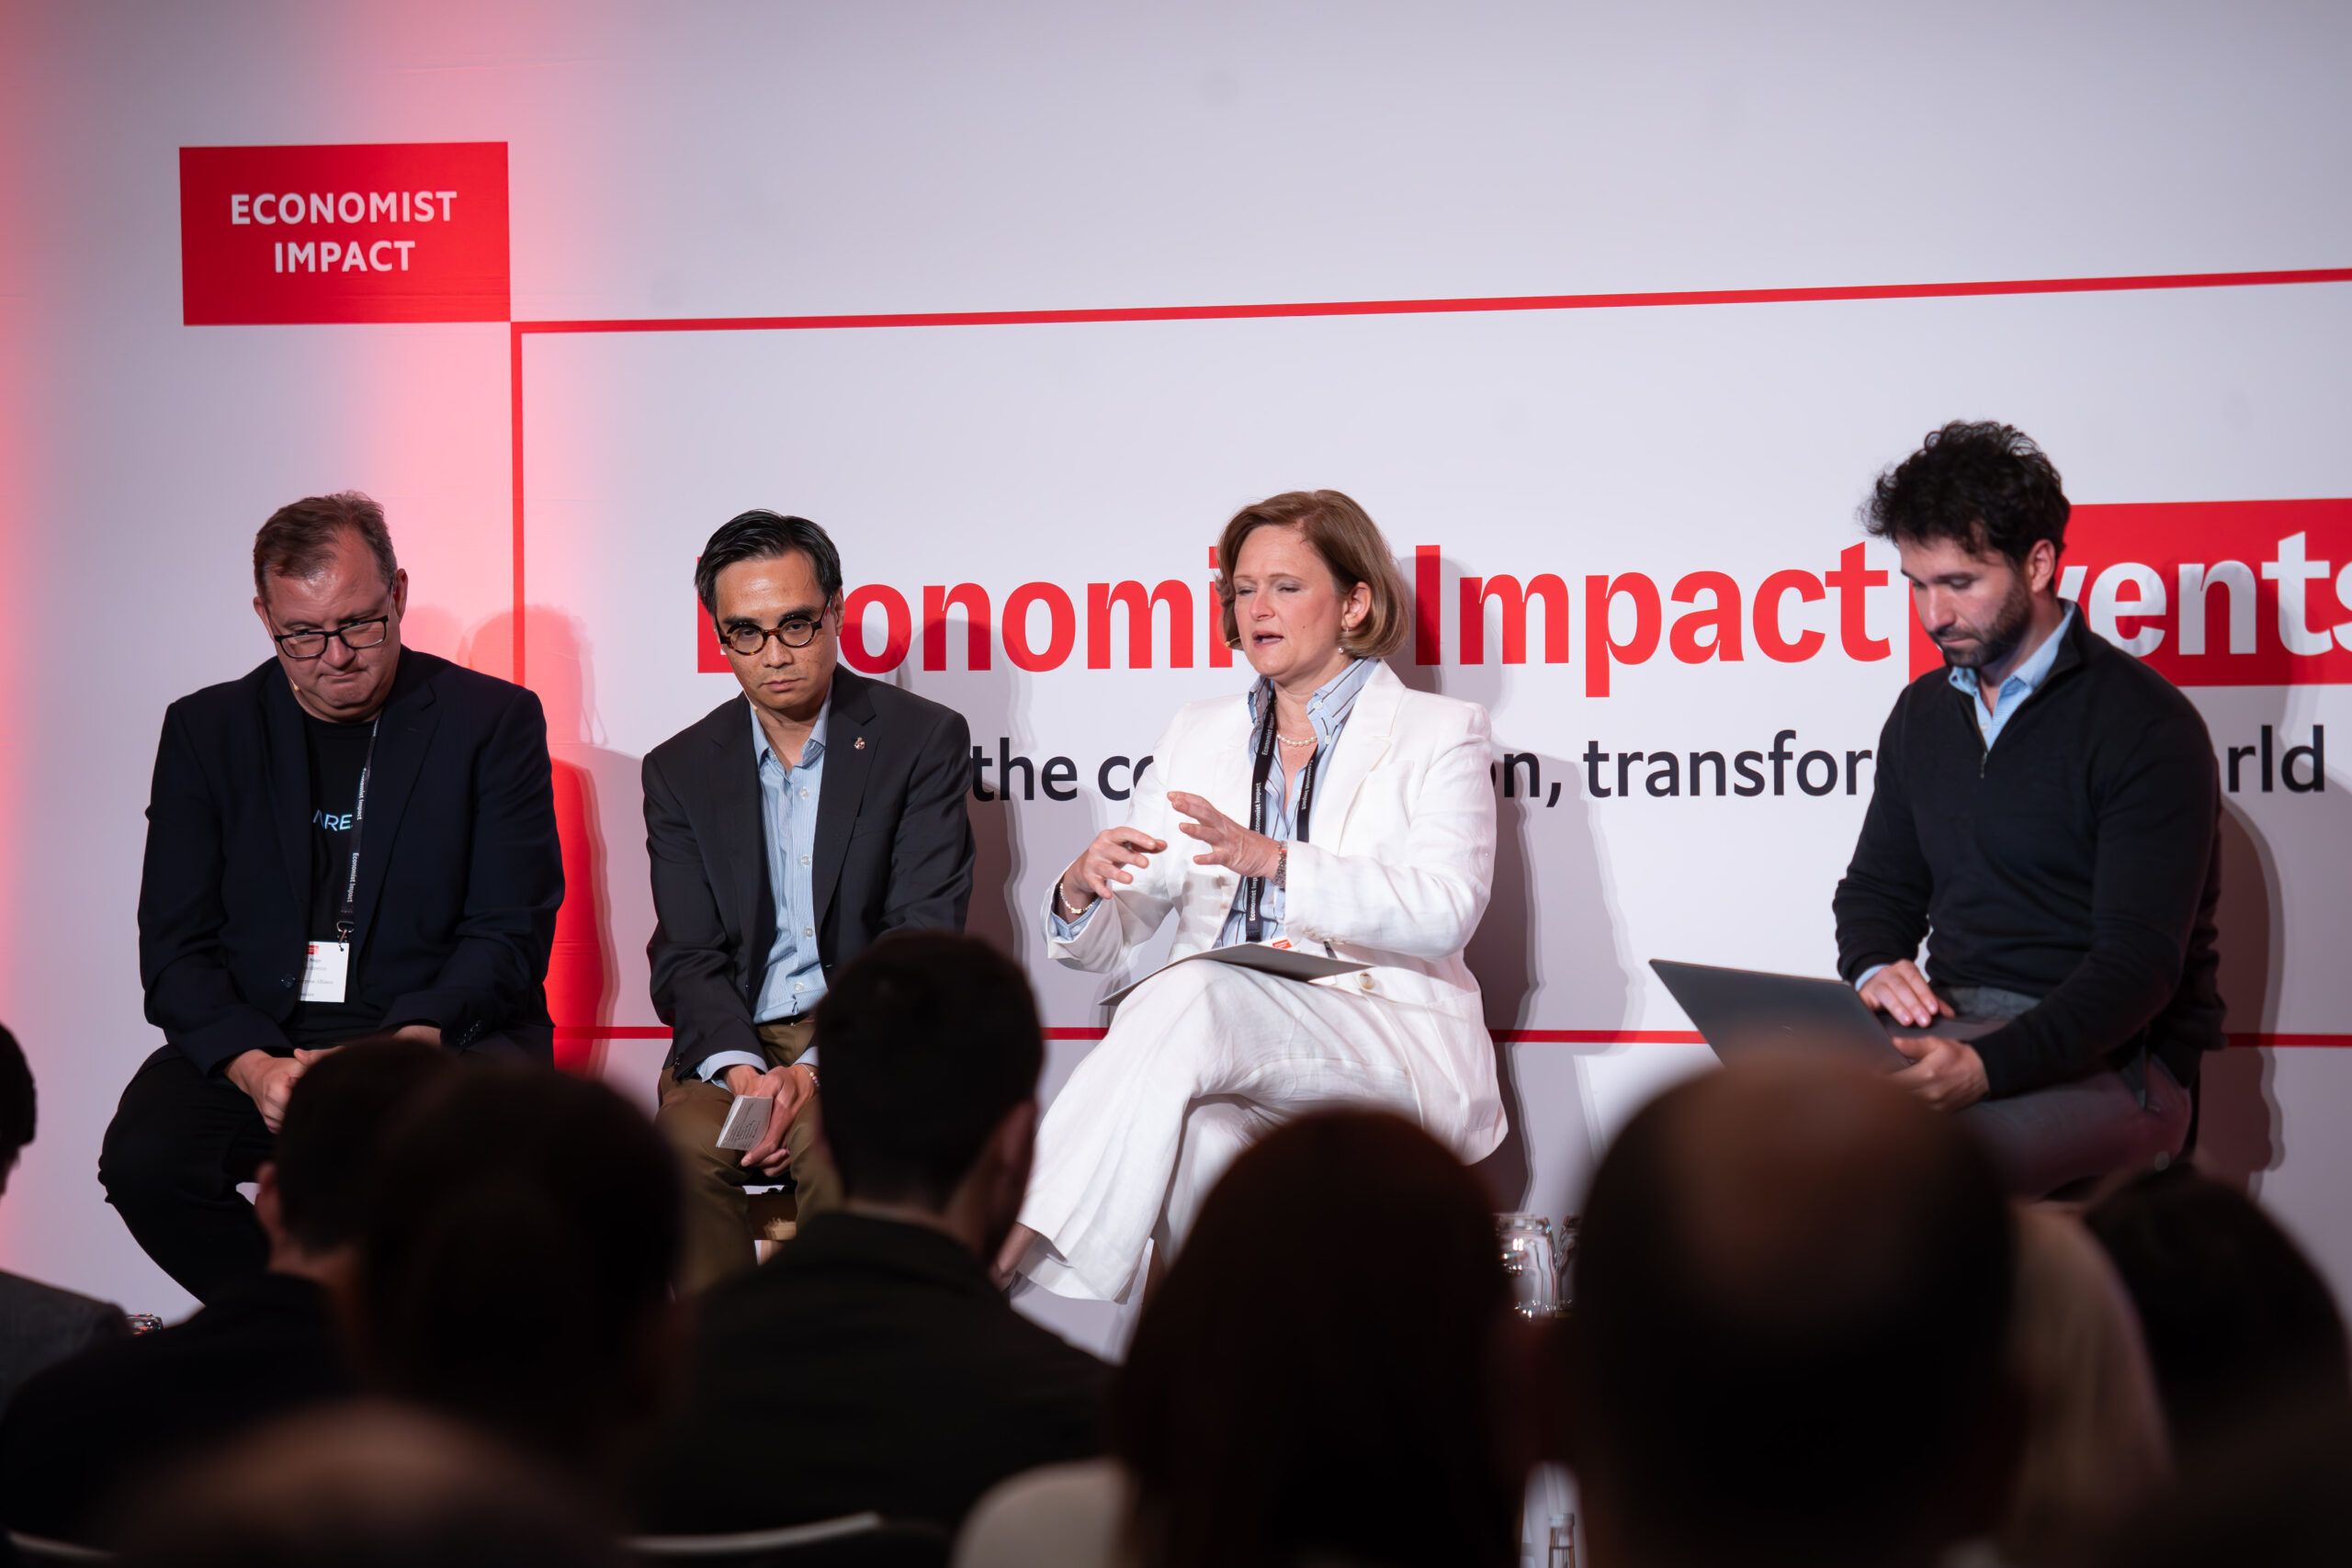 XRA’S SVP OF POLICY, JOAN O’HARA, ENGAGES WITH UK GOVERNMENT AGENCIES AND PARTICIPATES AT THE ECONOMIST IMPACT ENTERPRISE METAVERSE SUMMIT